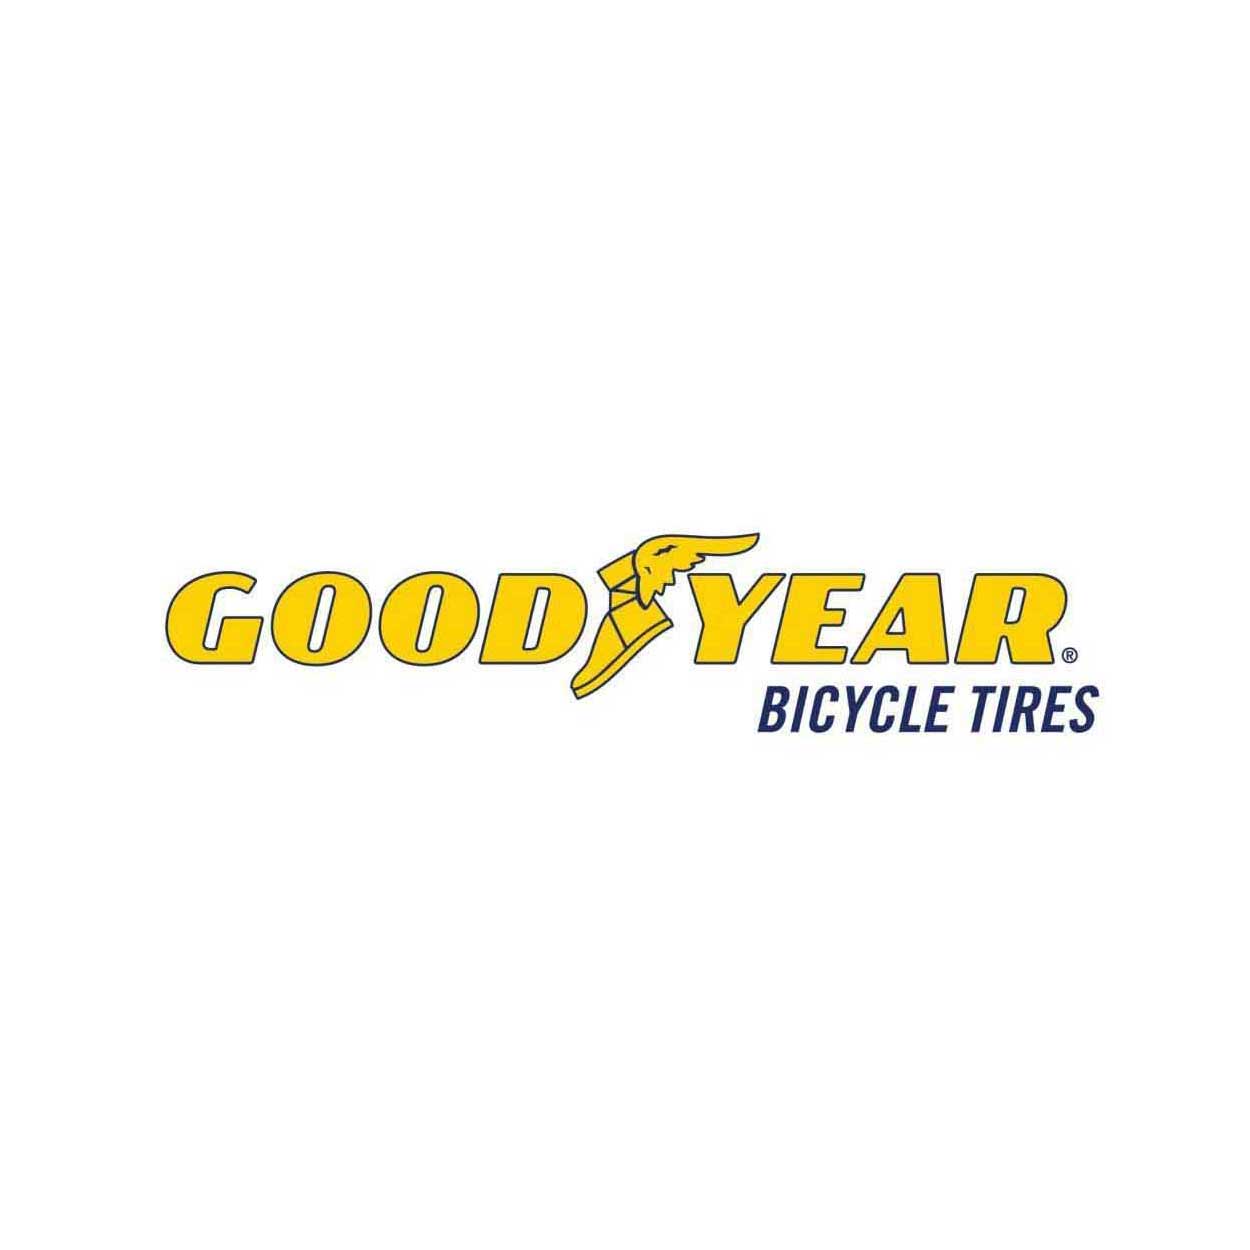 Goodyear-Bicycle-Tires-3-1024x372